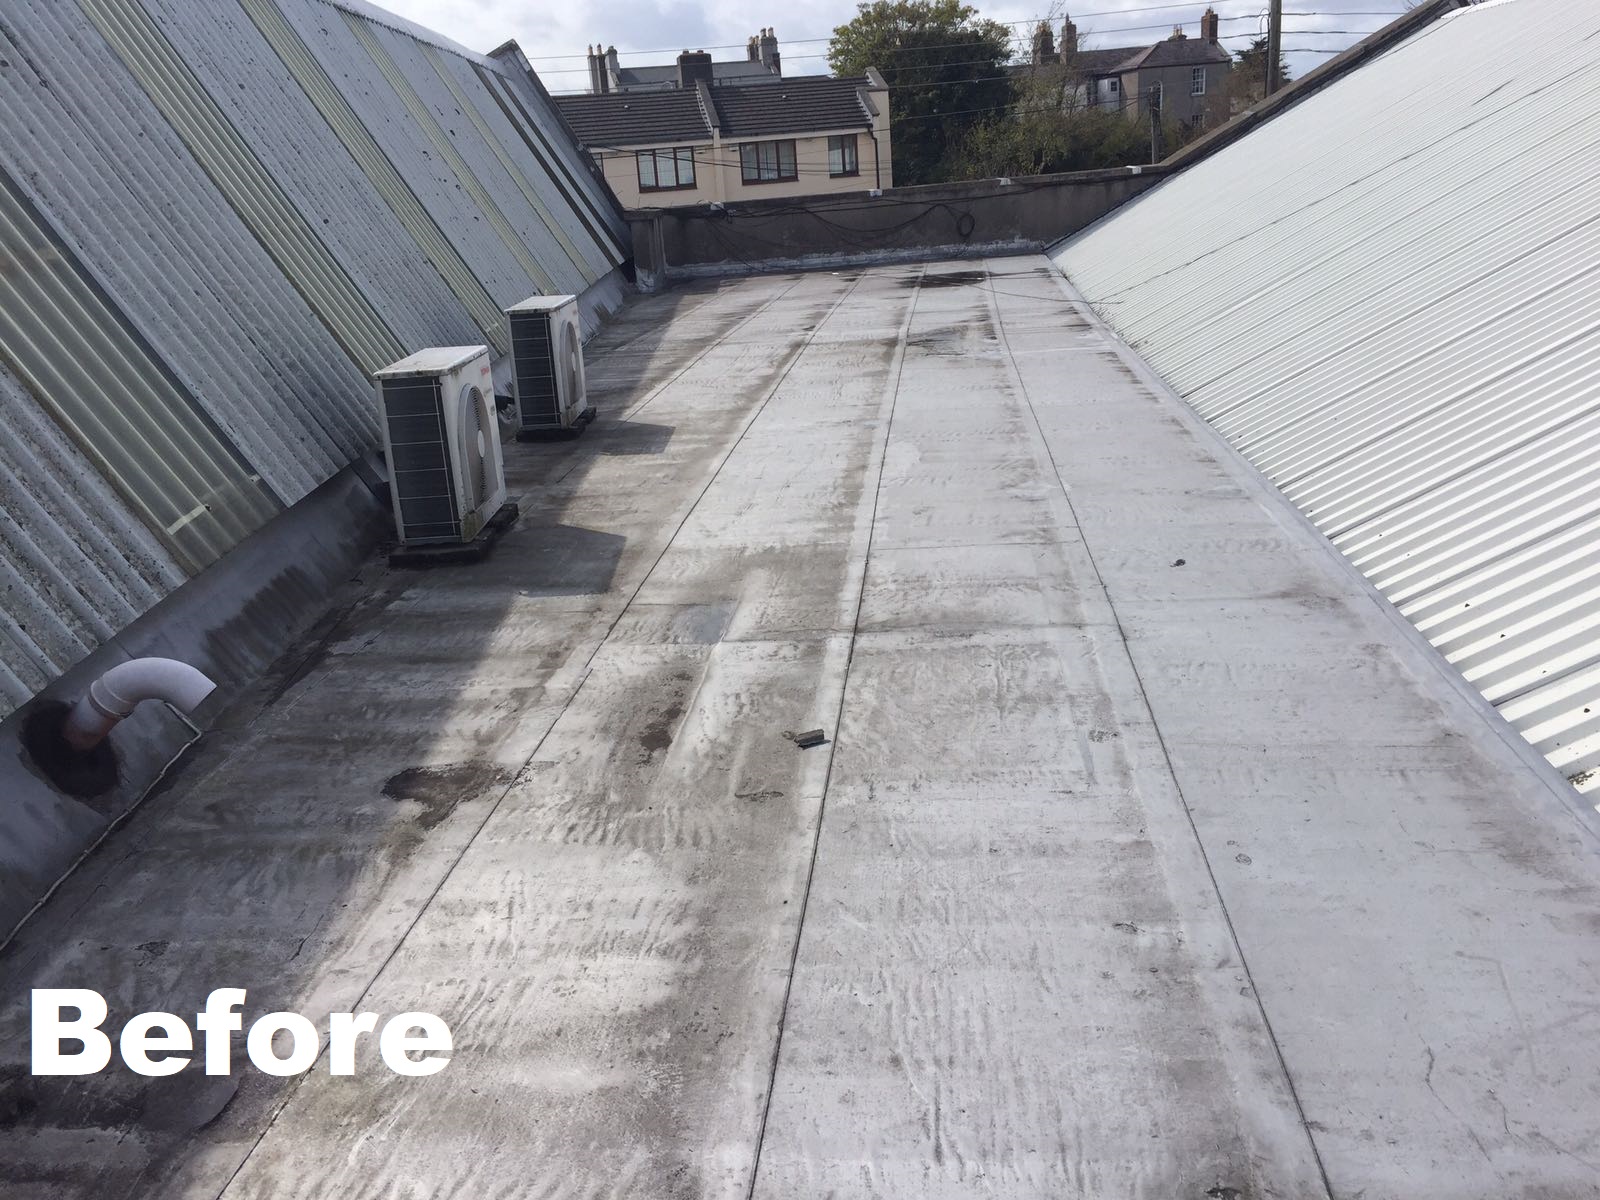 Before and after Felt Roofing